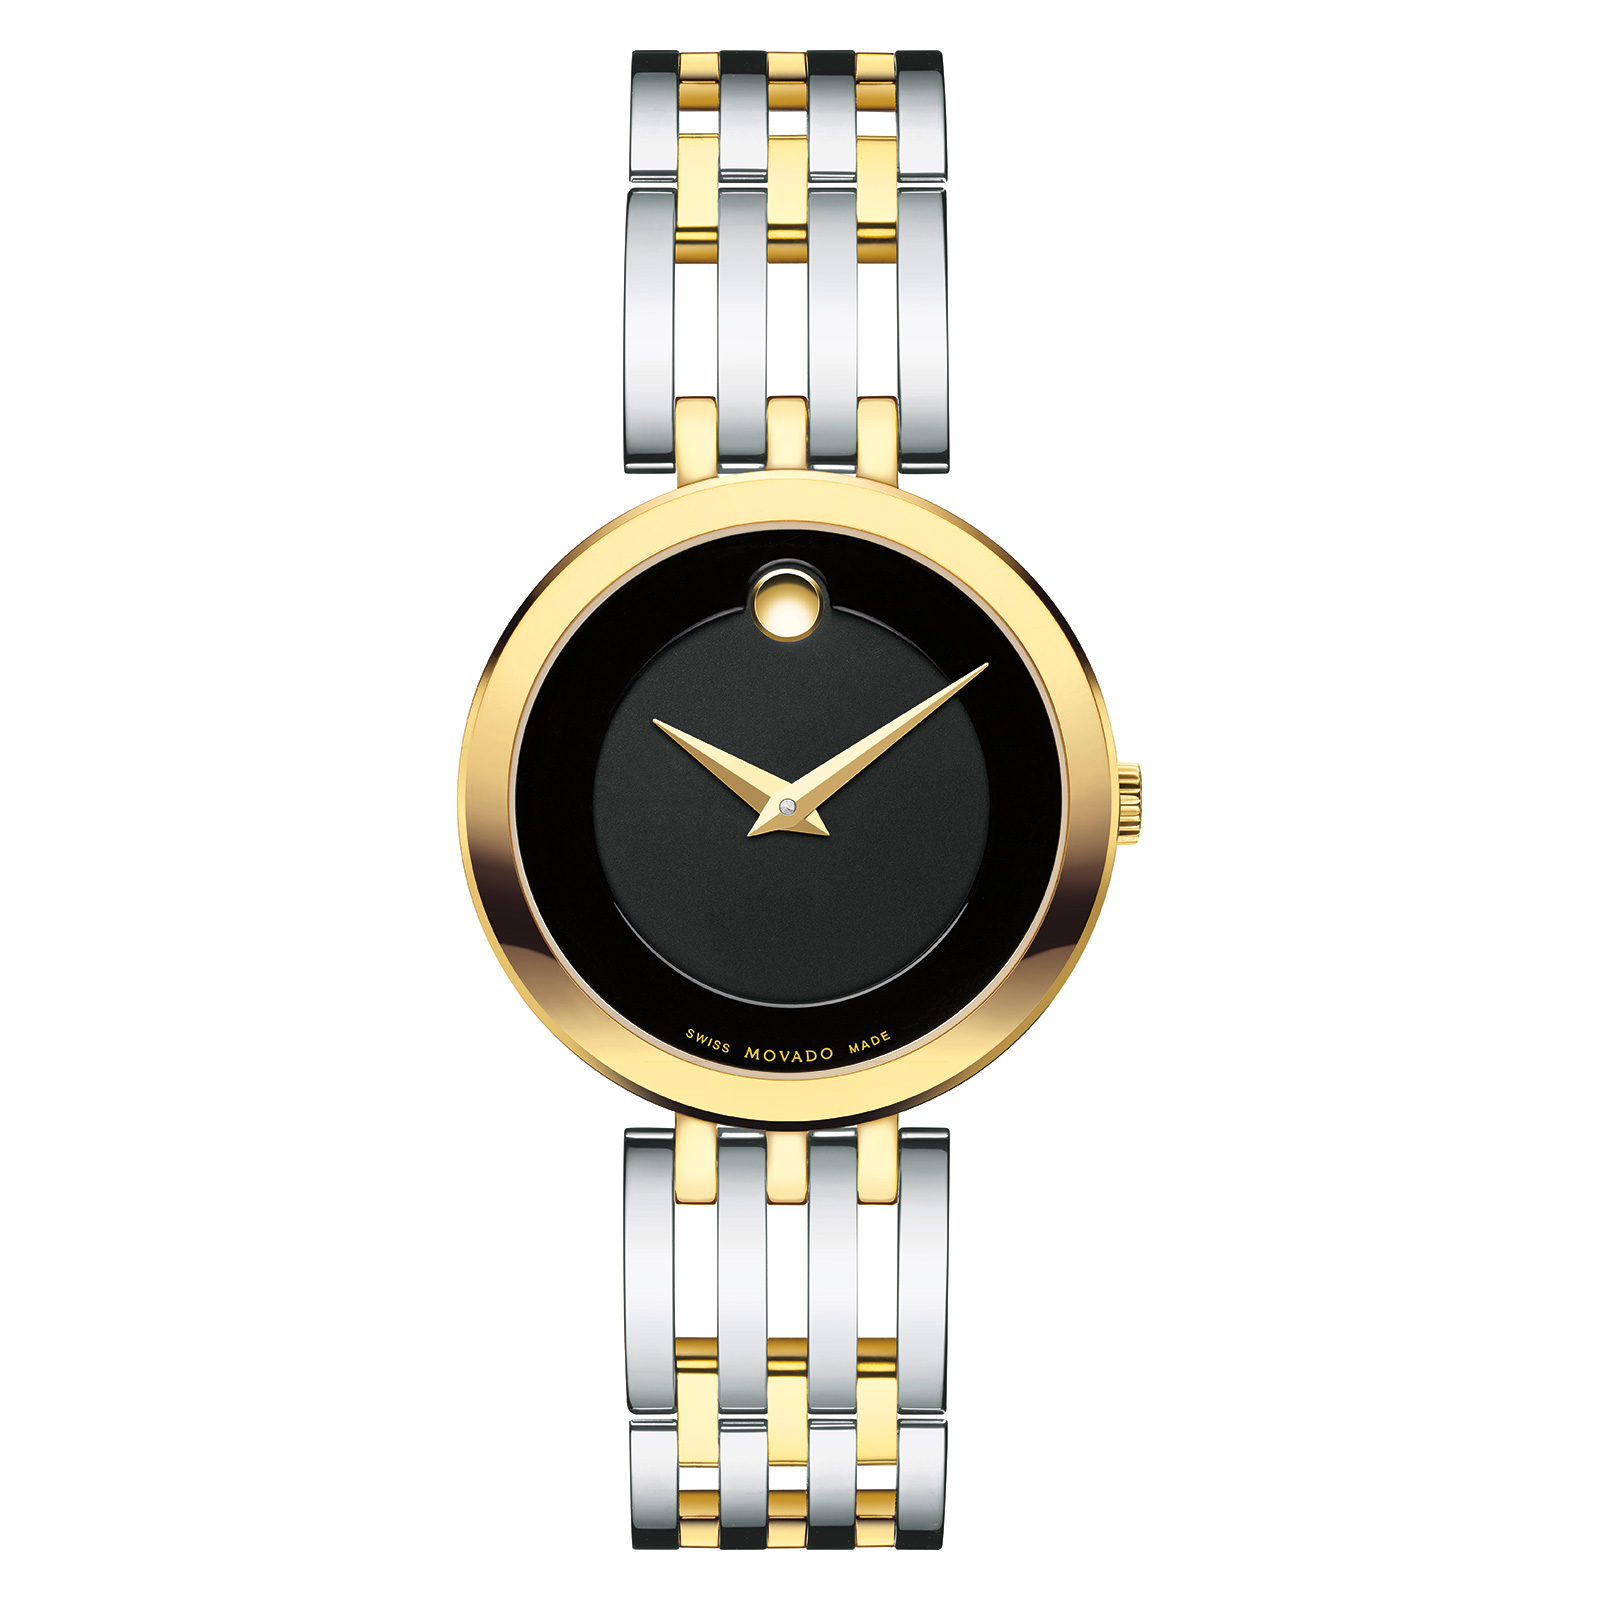 Discover Movado Watches Online and – | Switzerland of Watches Collections Prices